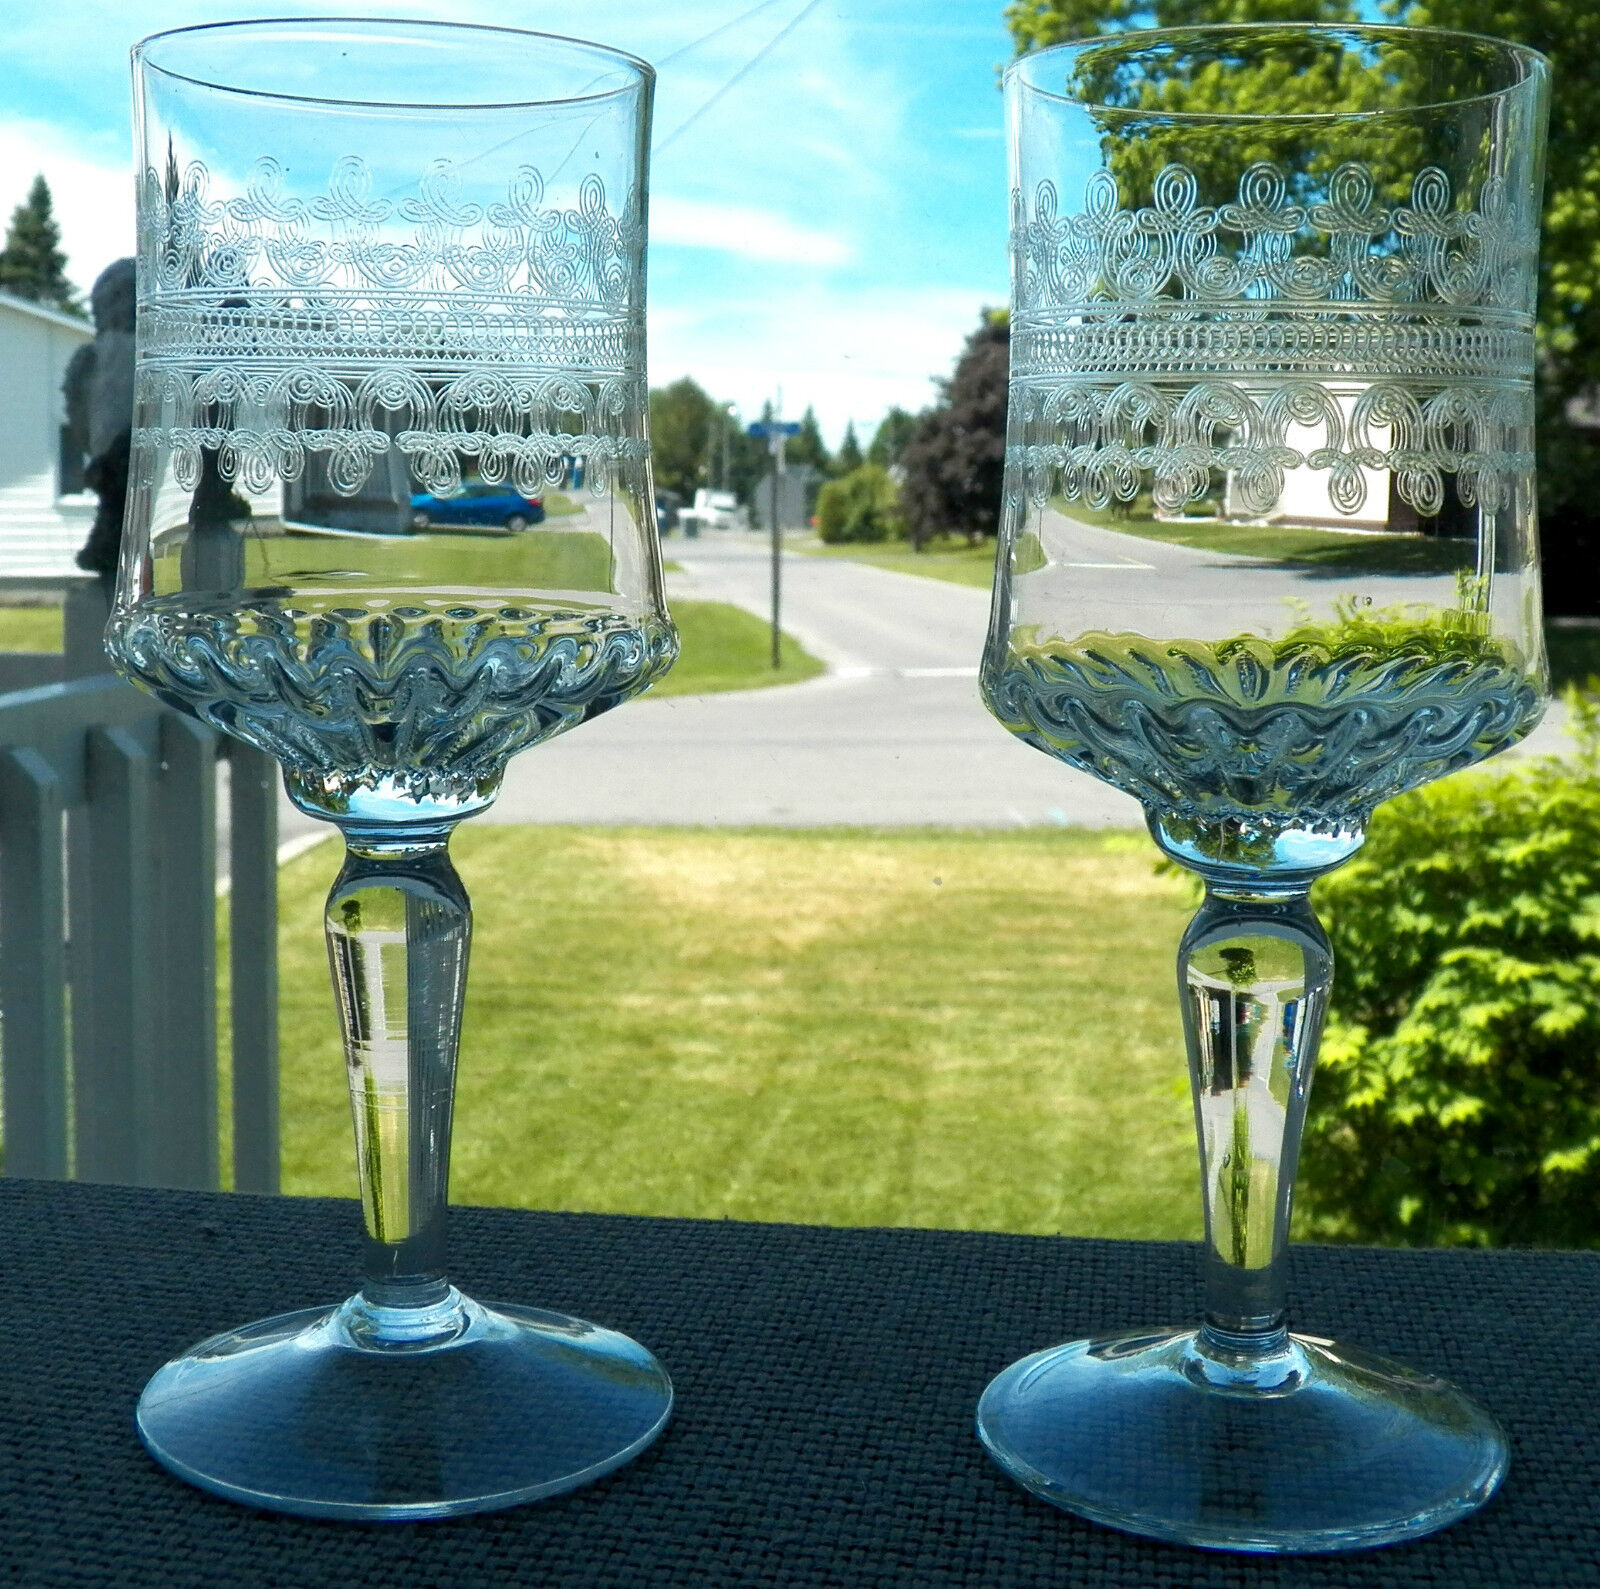 VERY LOVELY SET OF CRYSTAL STEMWARE BY BRYCE PATTERN 678-13 WITH ETCHED SCROLLS